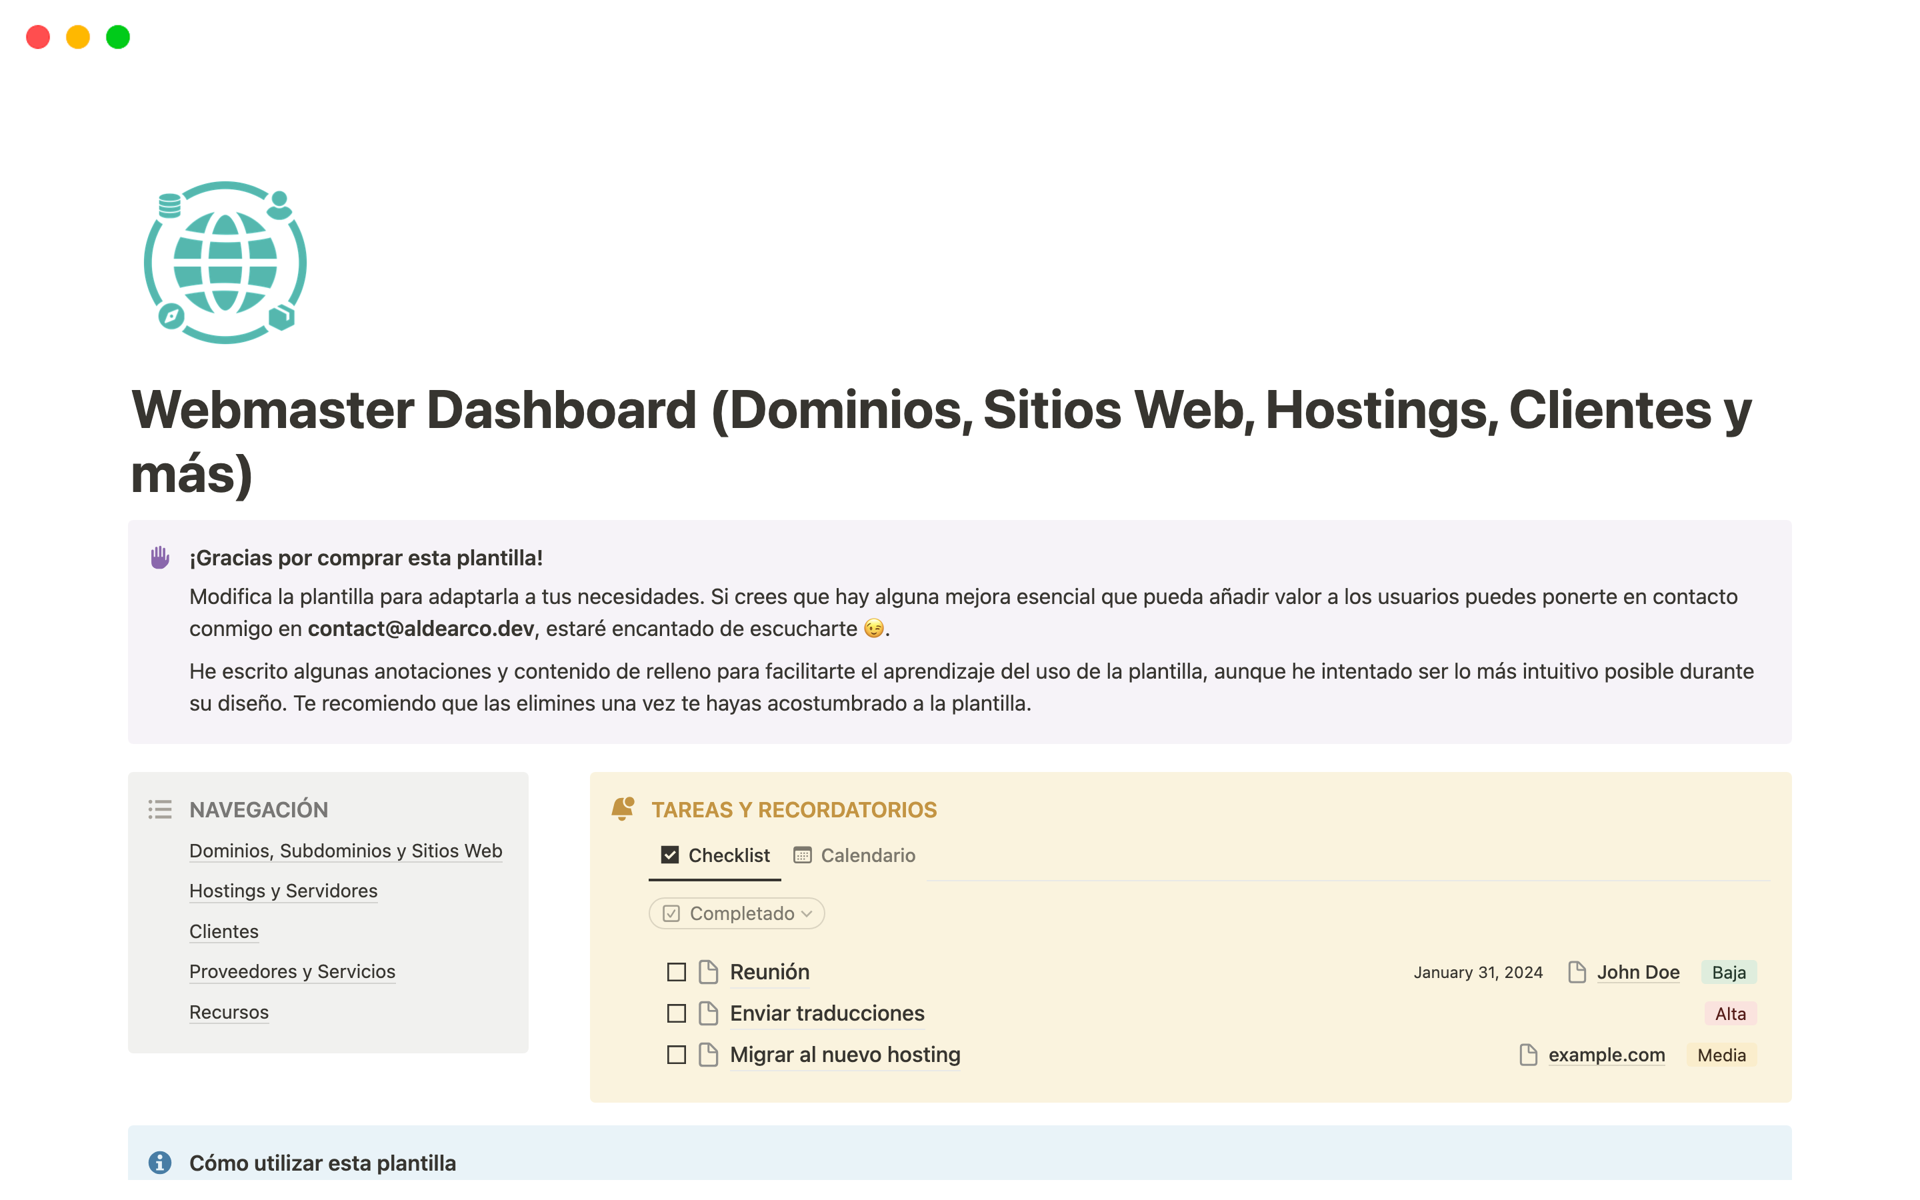 A template preview for Webmaster Dashboard (Dominios, Webs, Hostings)